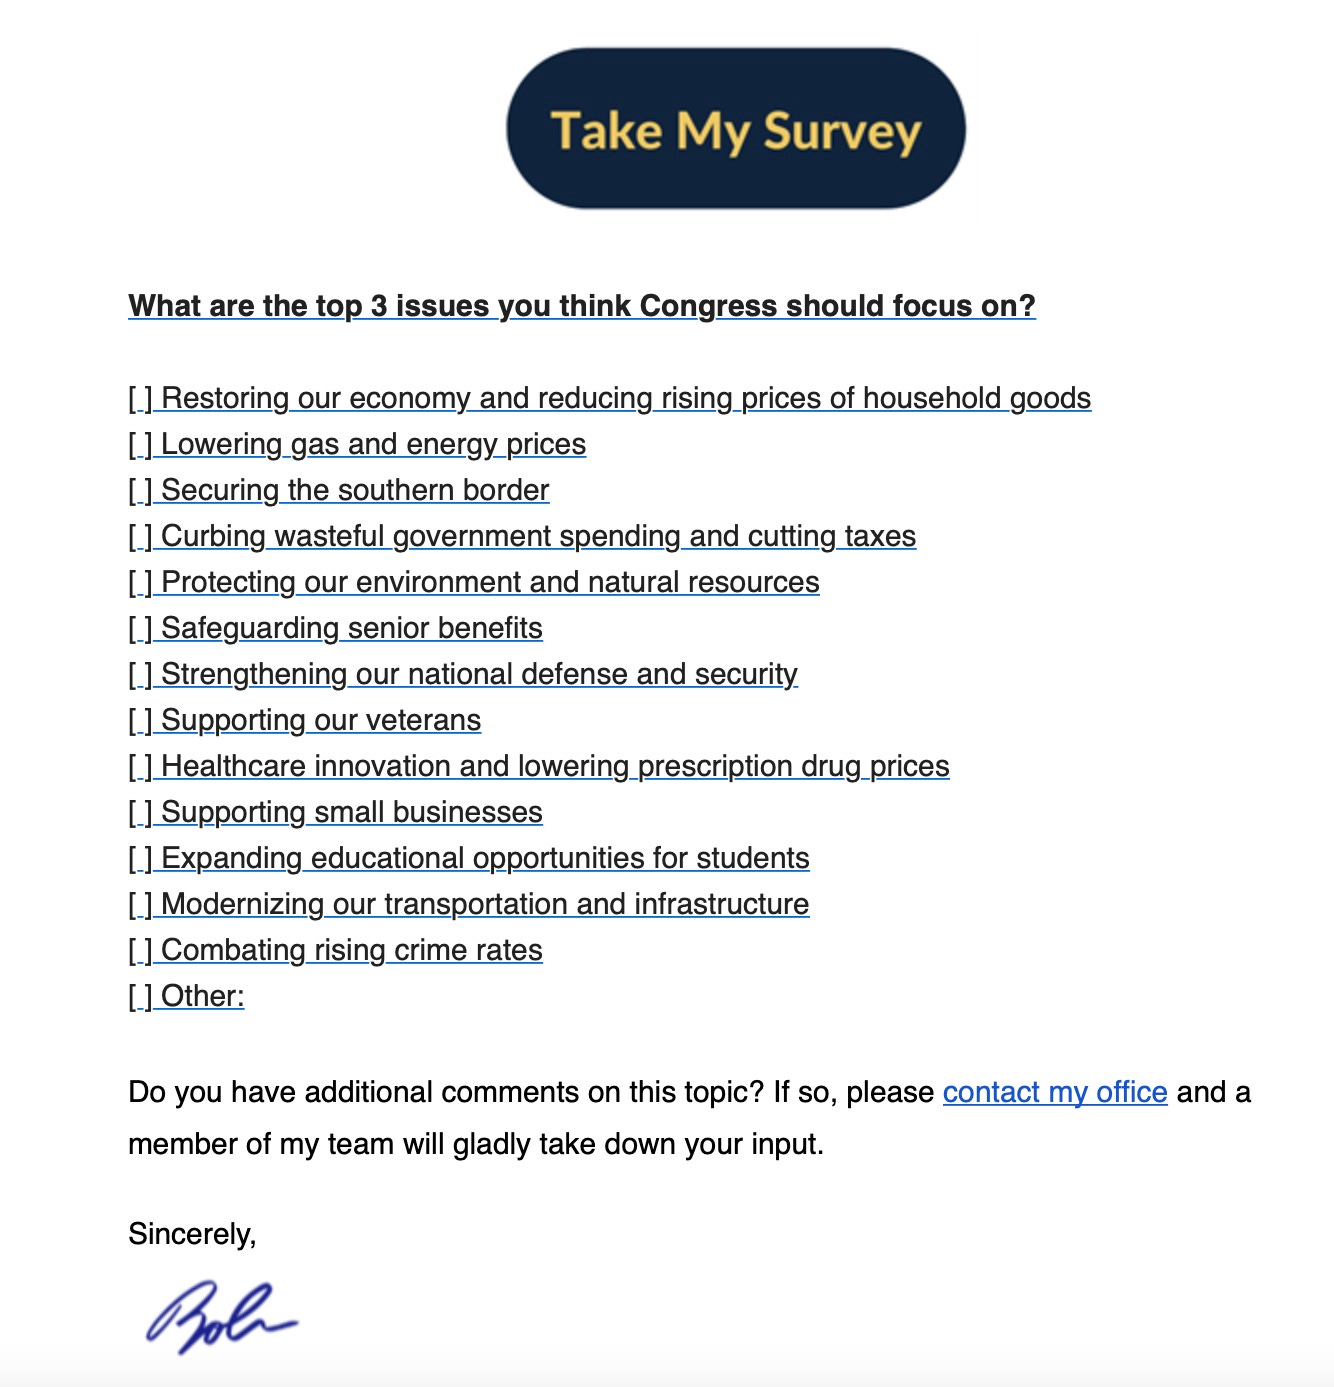 A survey form with a signature

Description automatically generated